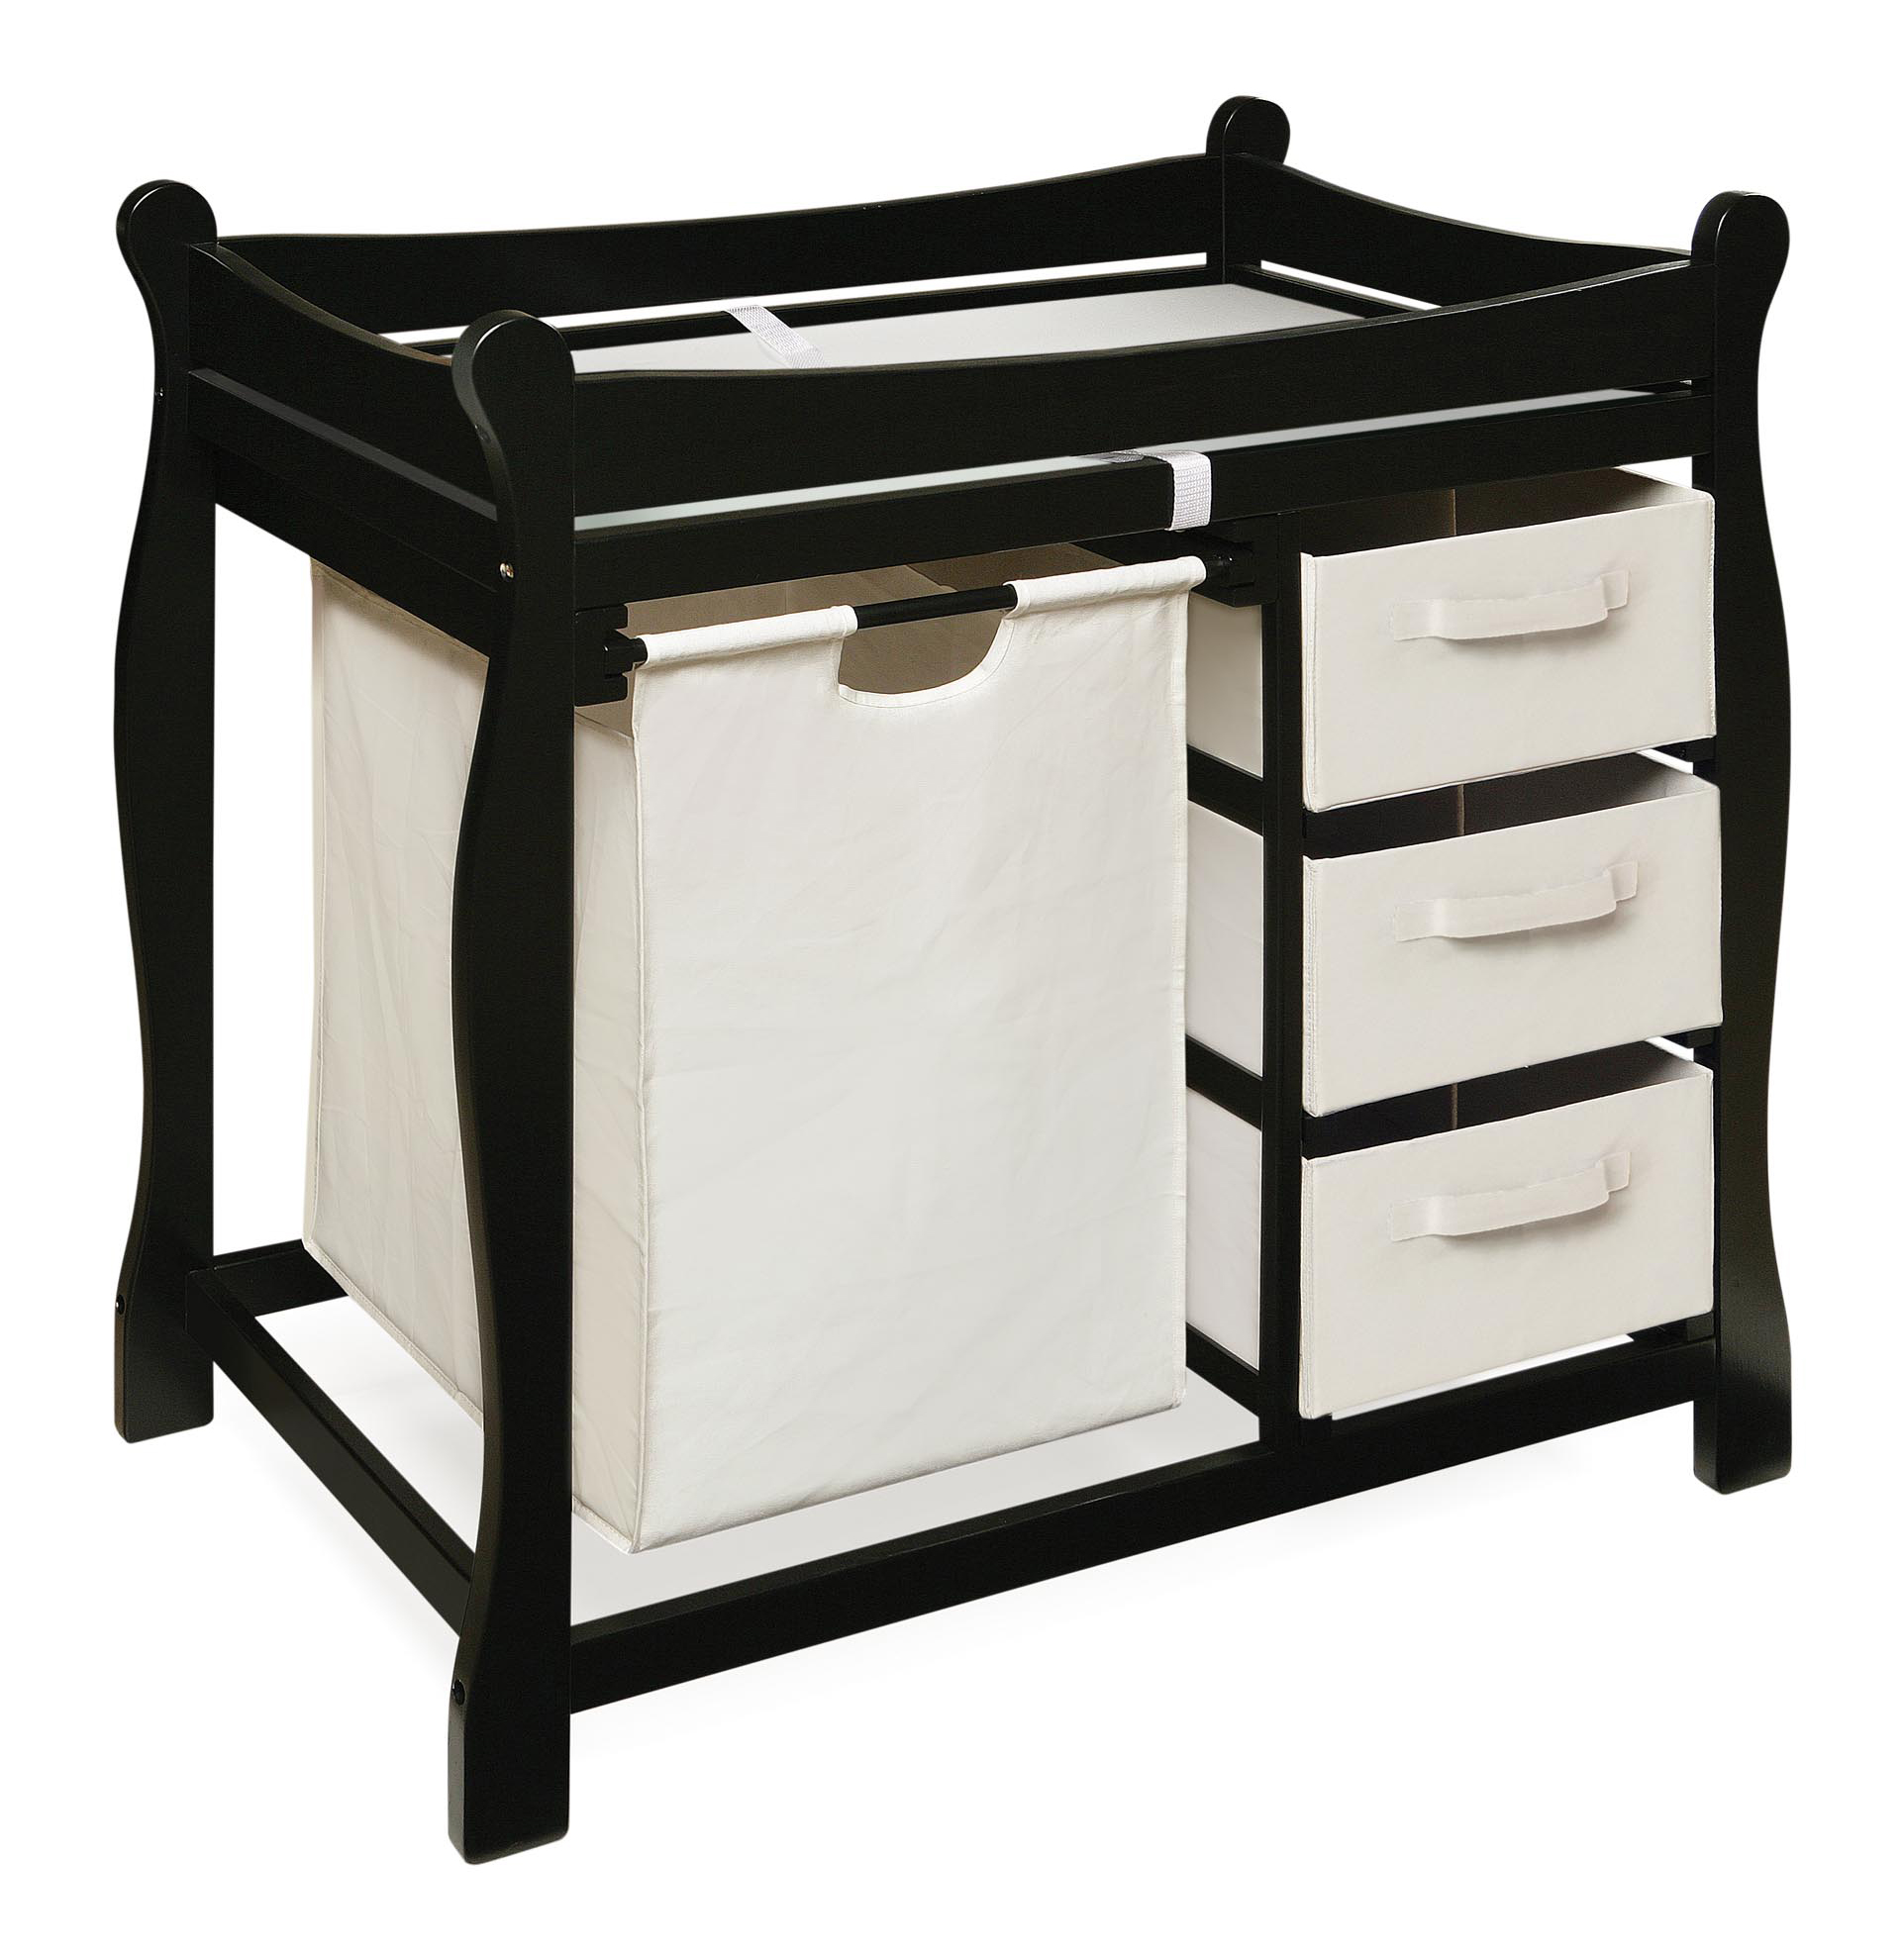 Sleigh Style Baby Changing Table with Hamper and 3 Baskets - Black